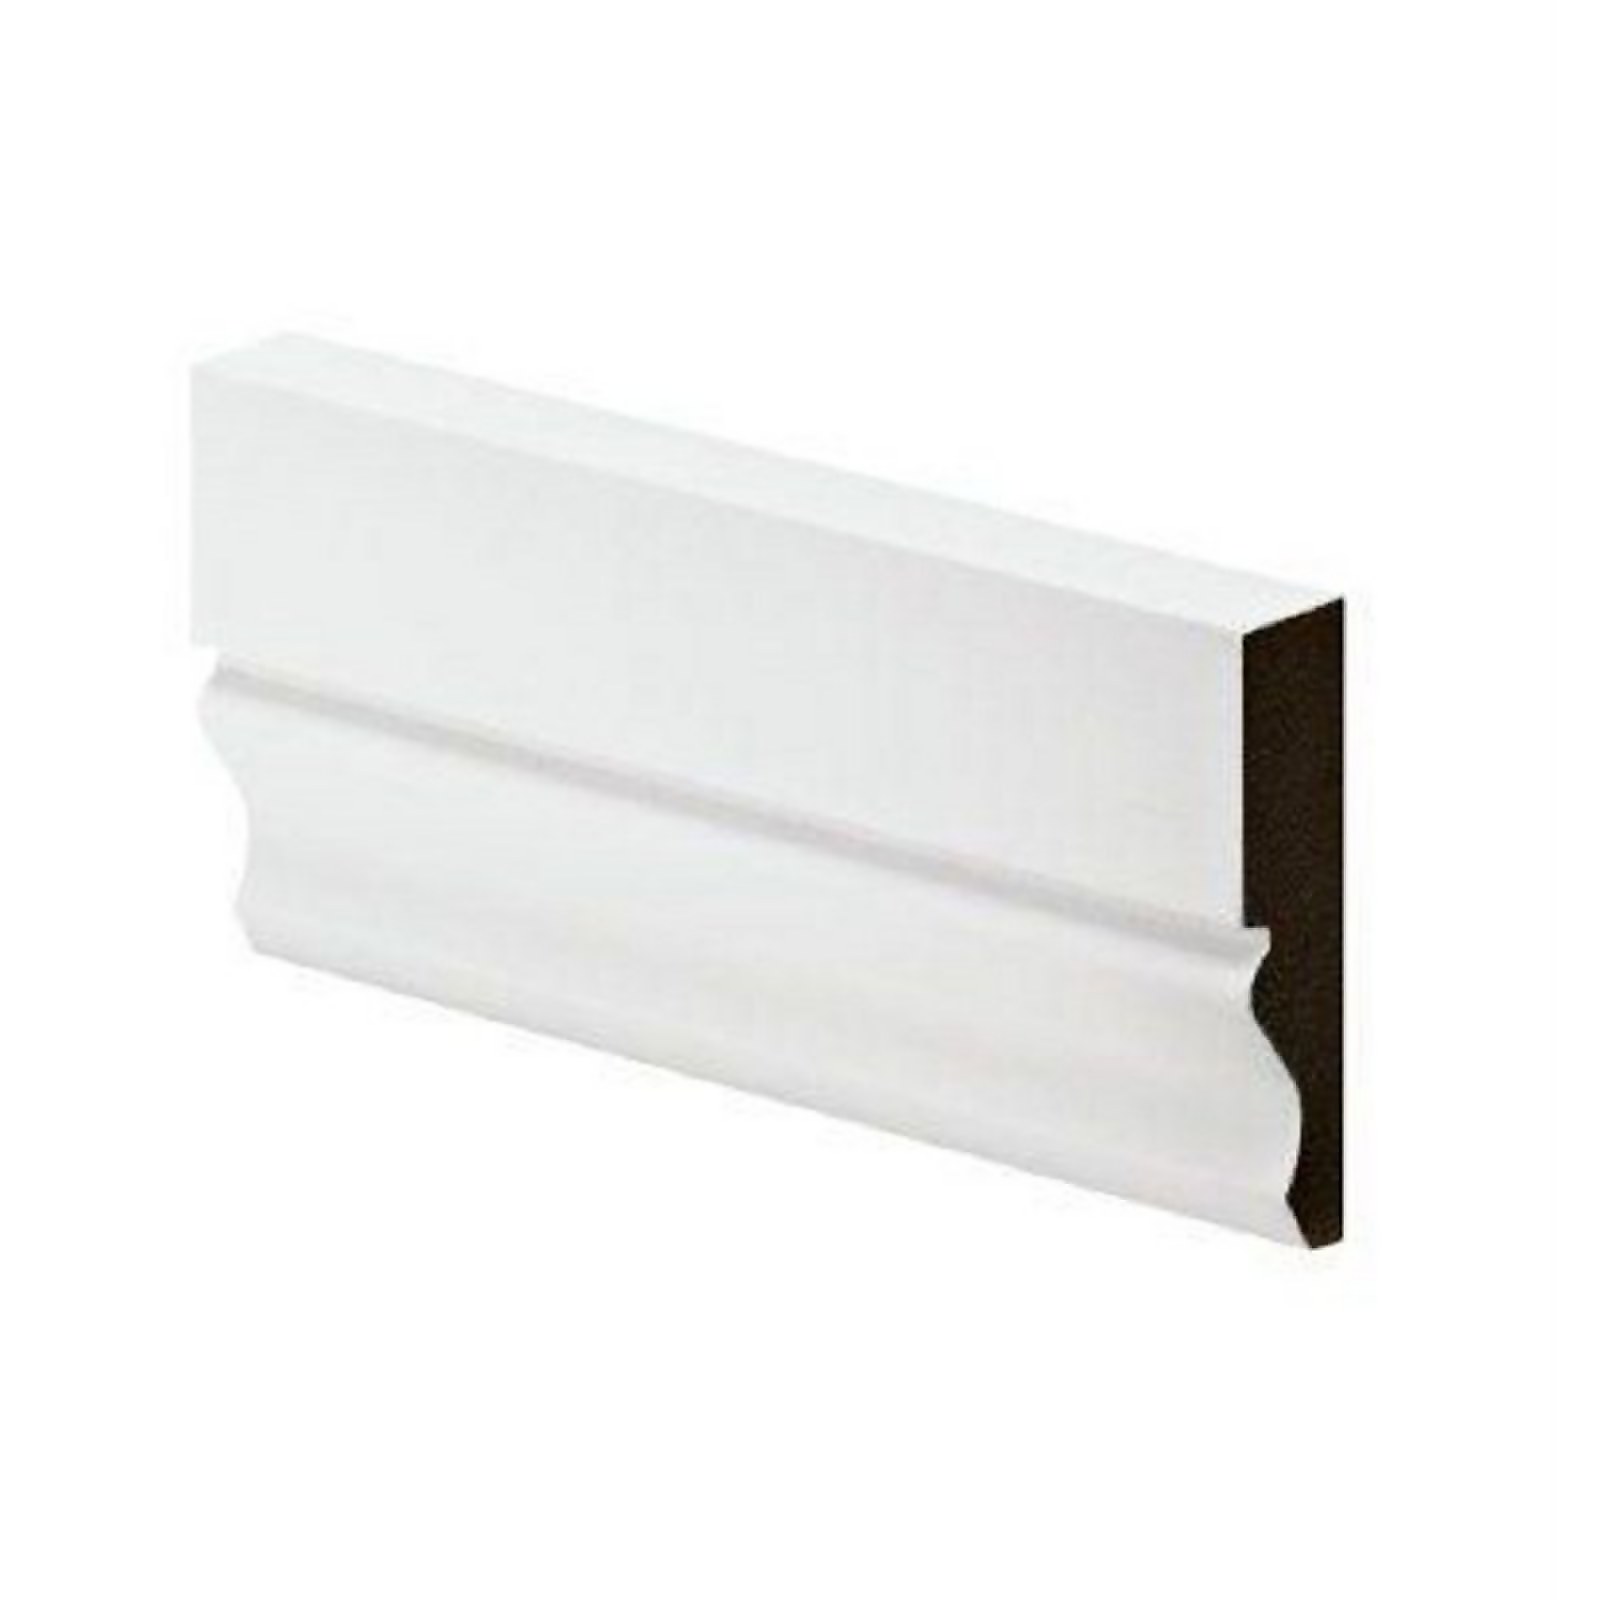 Photo of Mdf Pmd Ogee Architrave 18 X 69mm X 2.1m